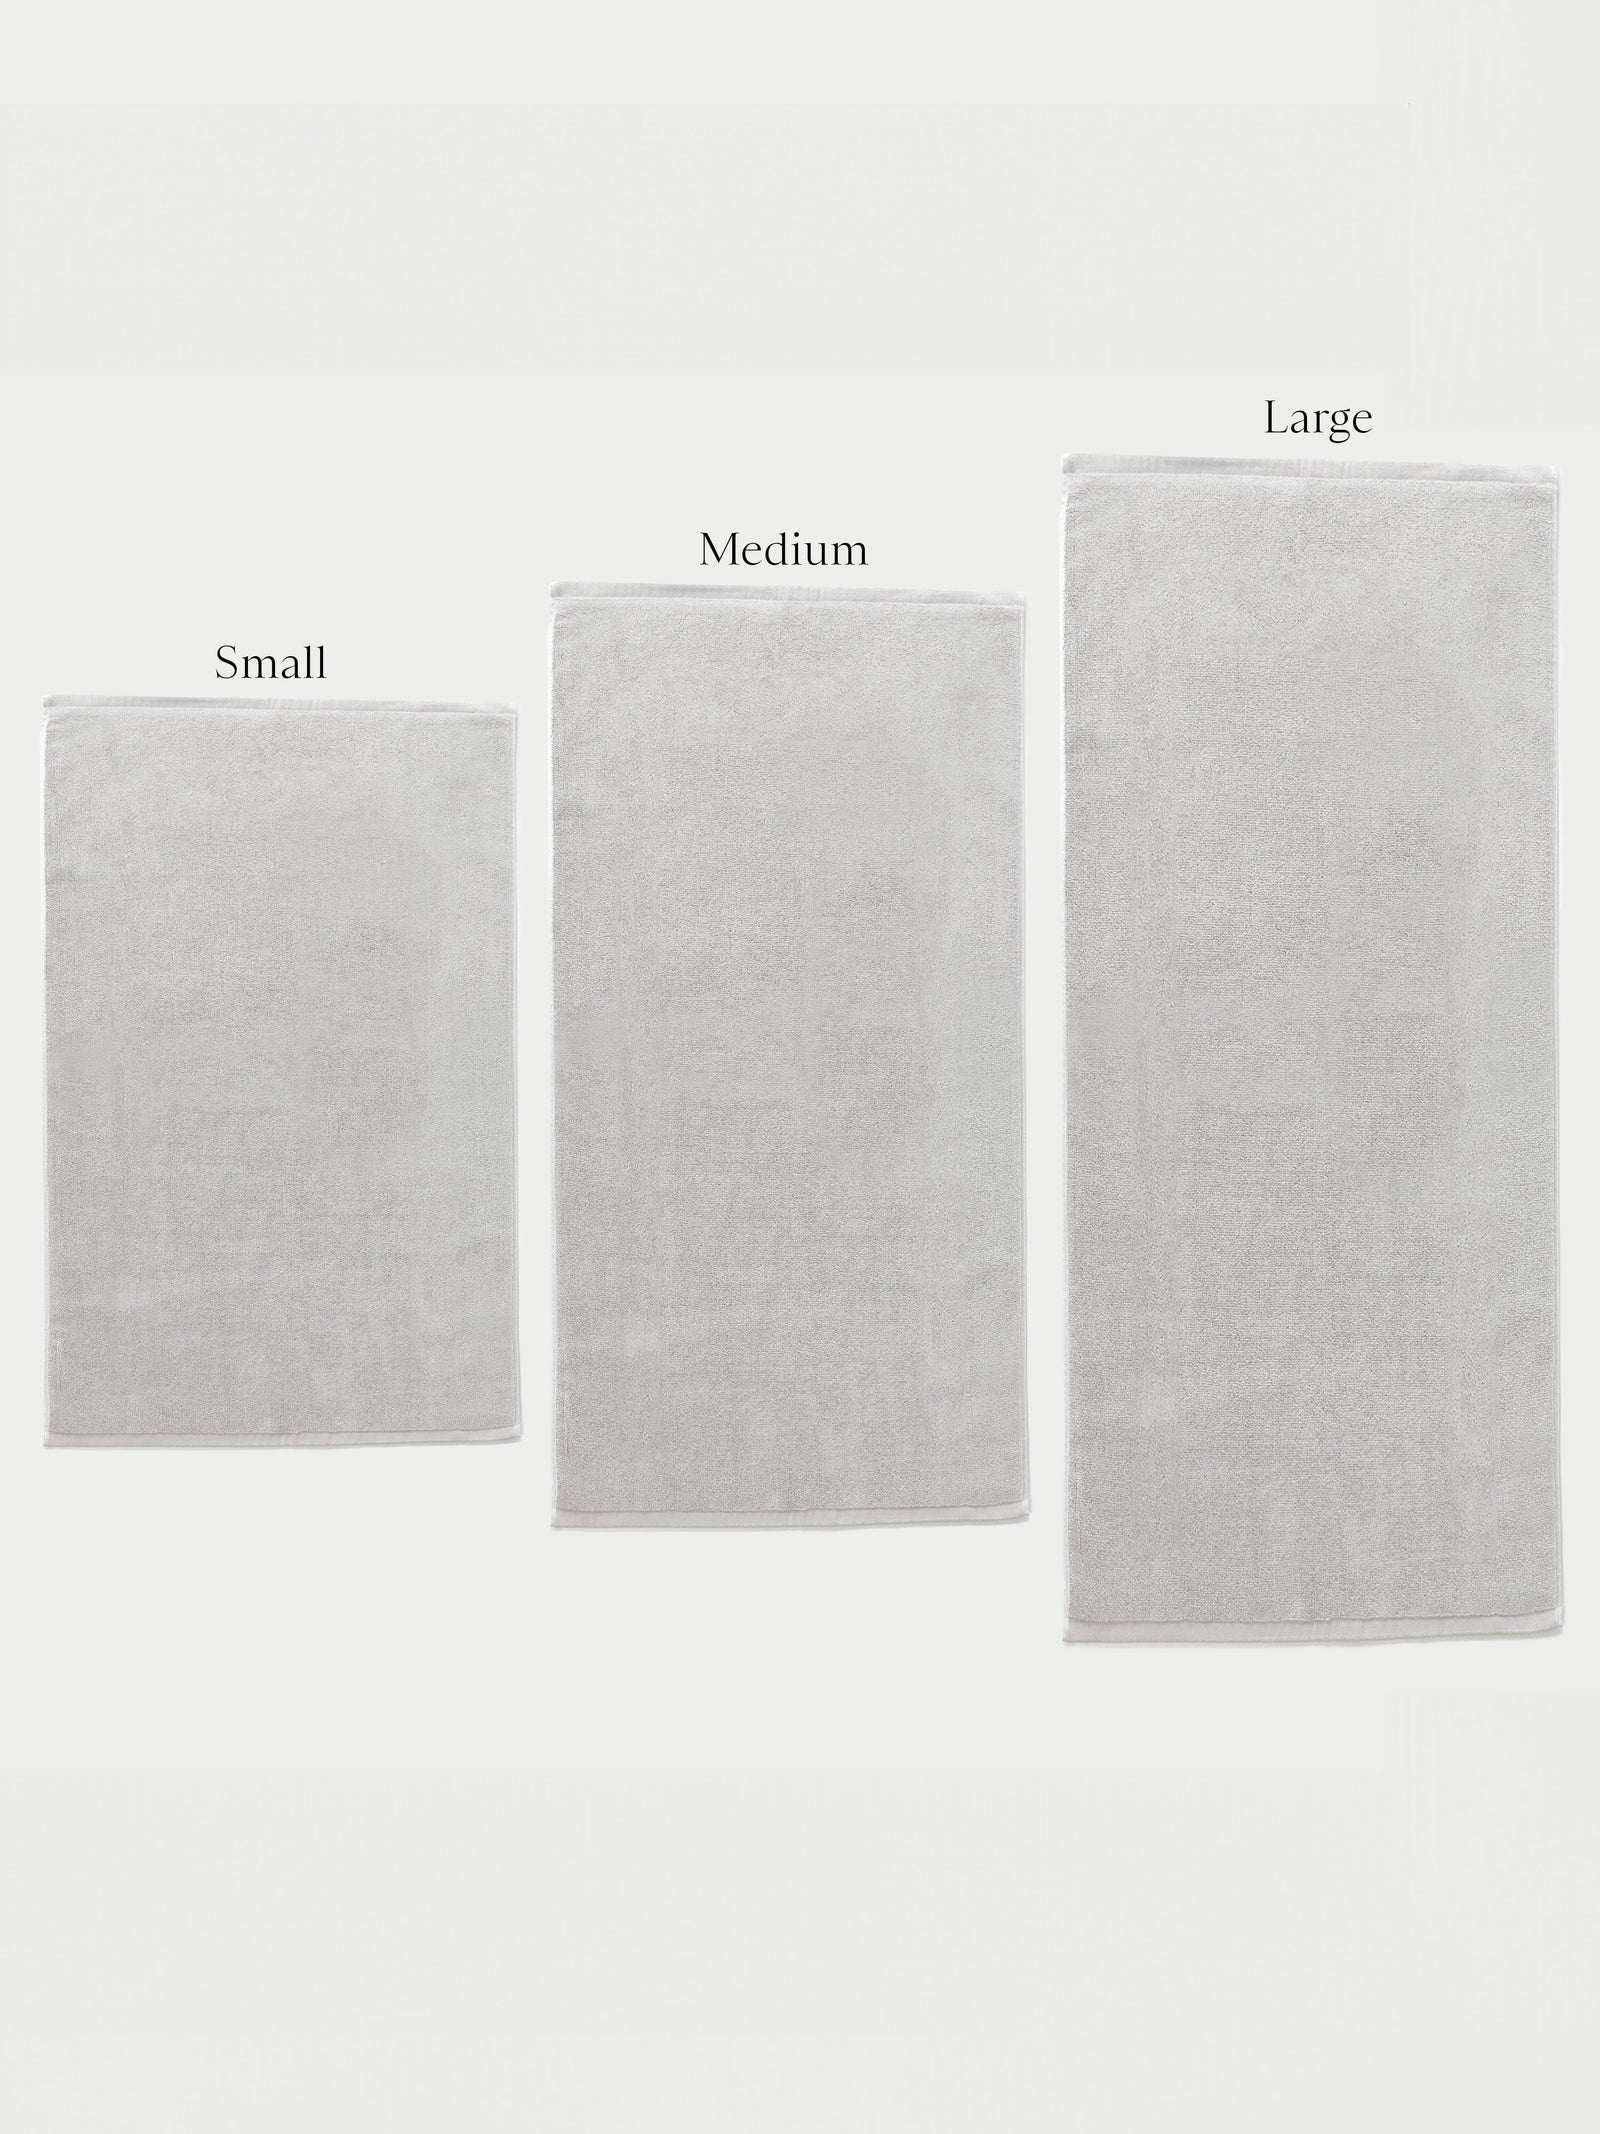 Over a white background rest all three sizes of bath mat. The labels "Small", "Medium", and "Large" are labeled over the bath mats.